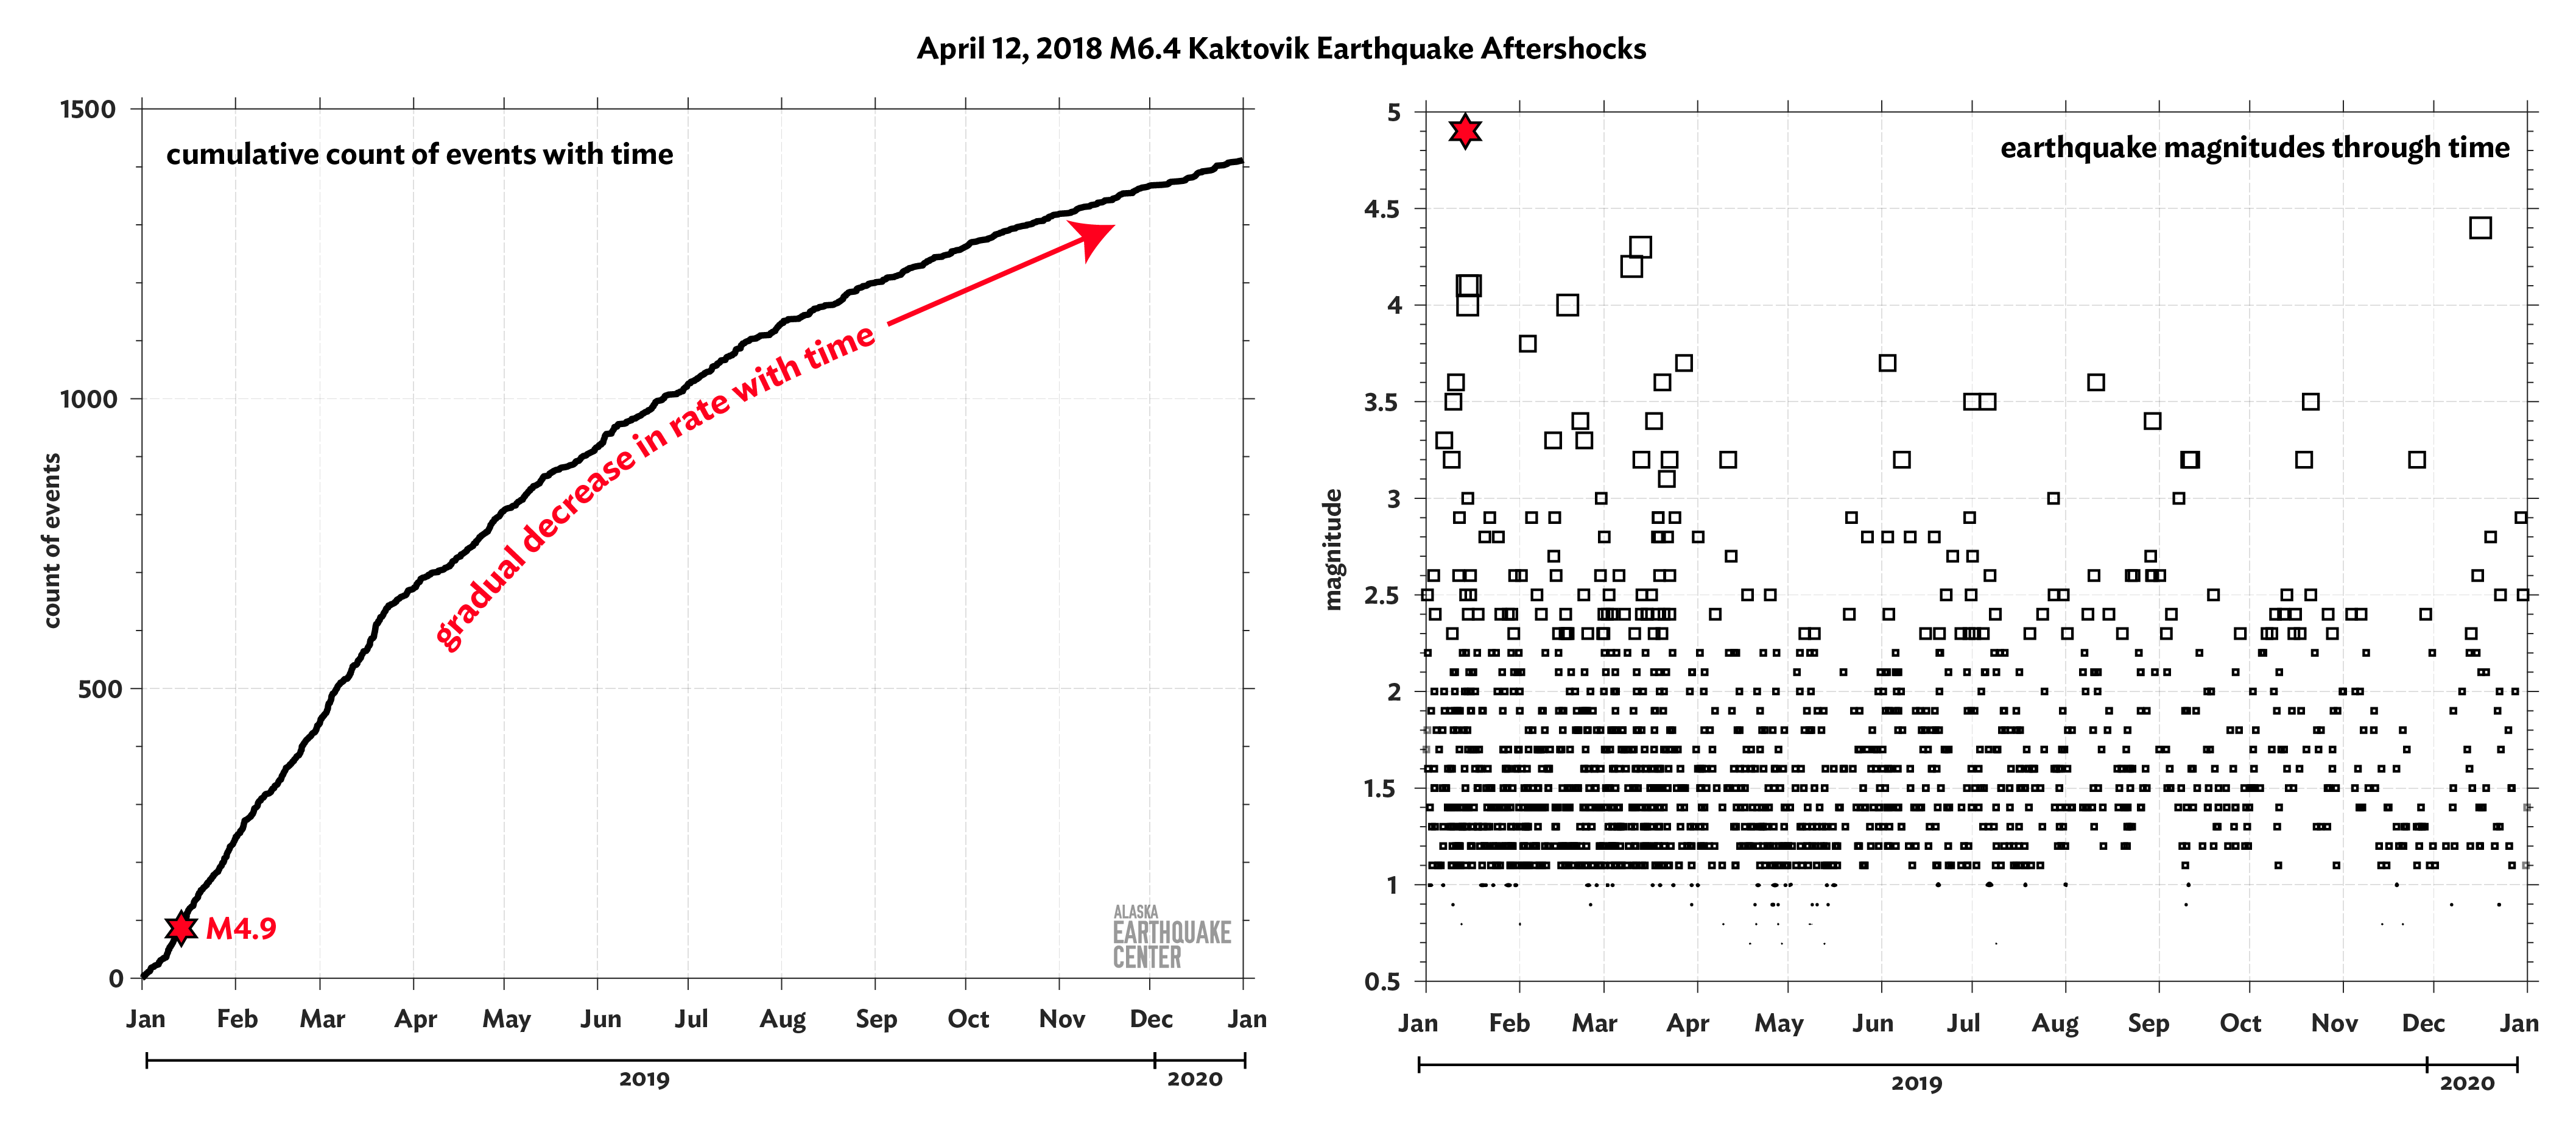 hese plots show the cumulative count of aftershocks from the August 12, 2018 M6.4 Kaktovik earthquake 